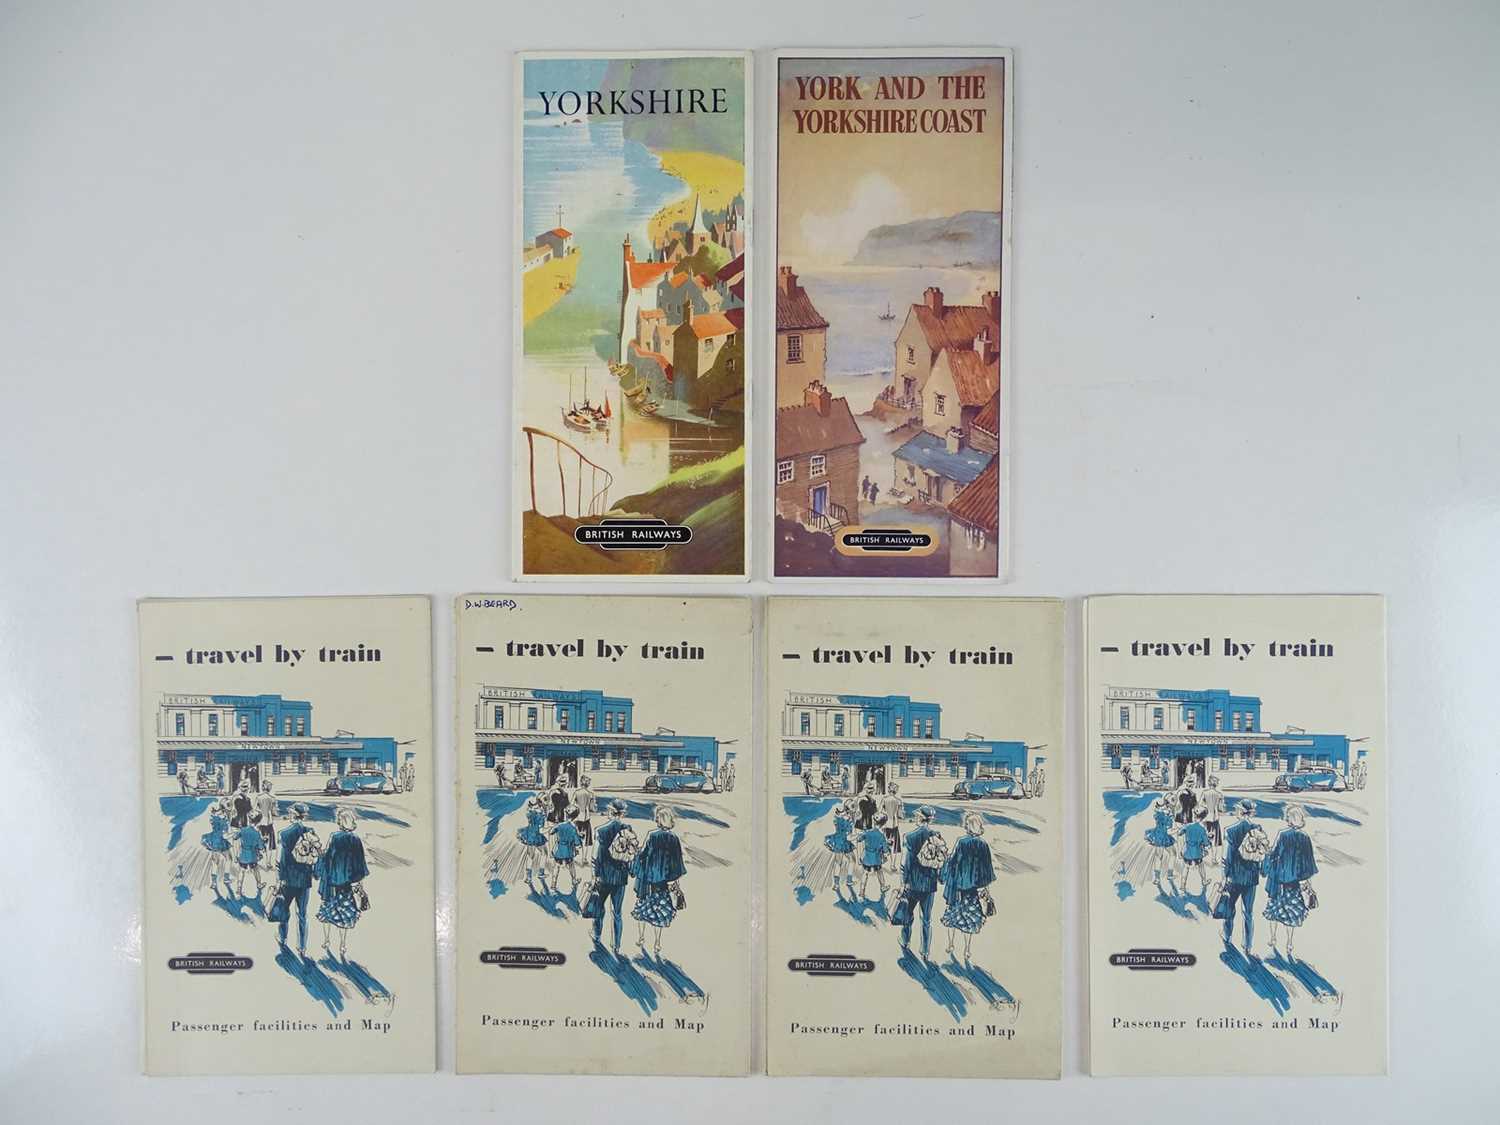 A selection of leaflets containing fold out maps comprising: Yorkshire, York and the Yorkshire Coast